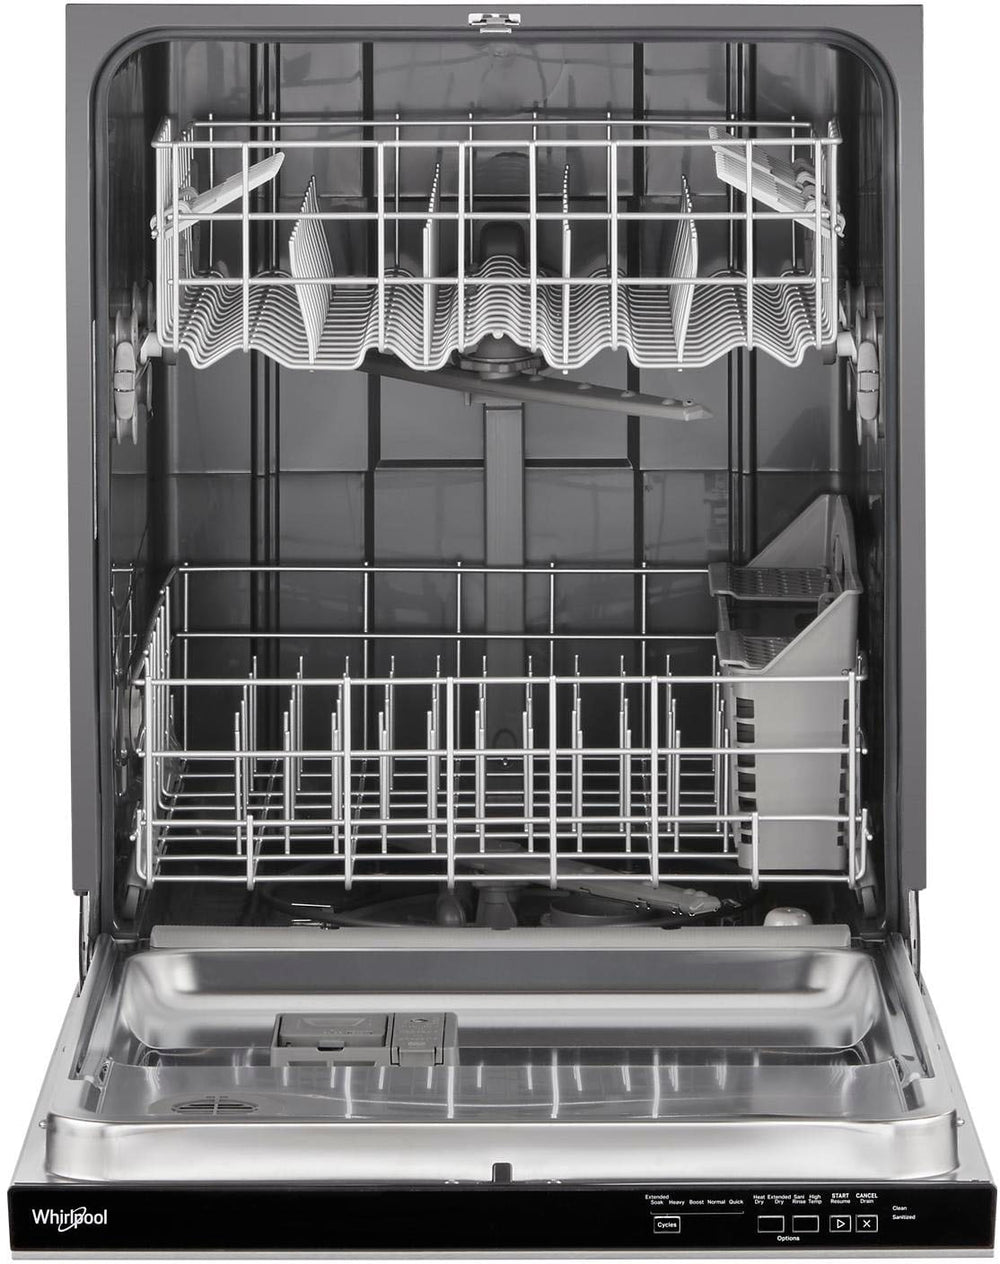 Whirlpool - Top Control Built-In Dishwasher with Boost Cycle 55 dBa - Stainless steel_1